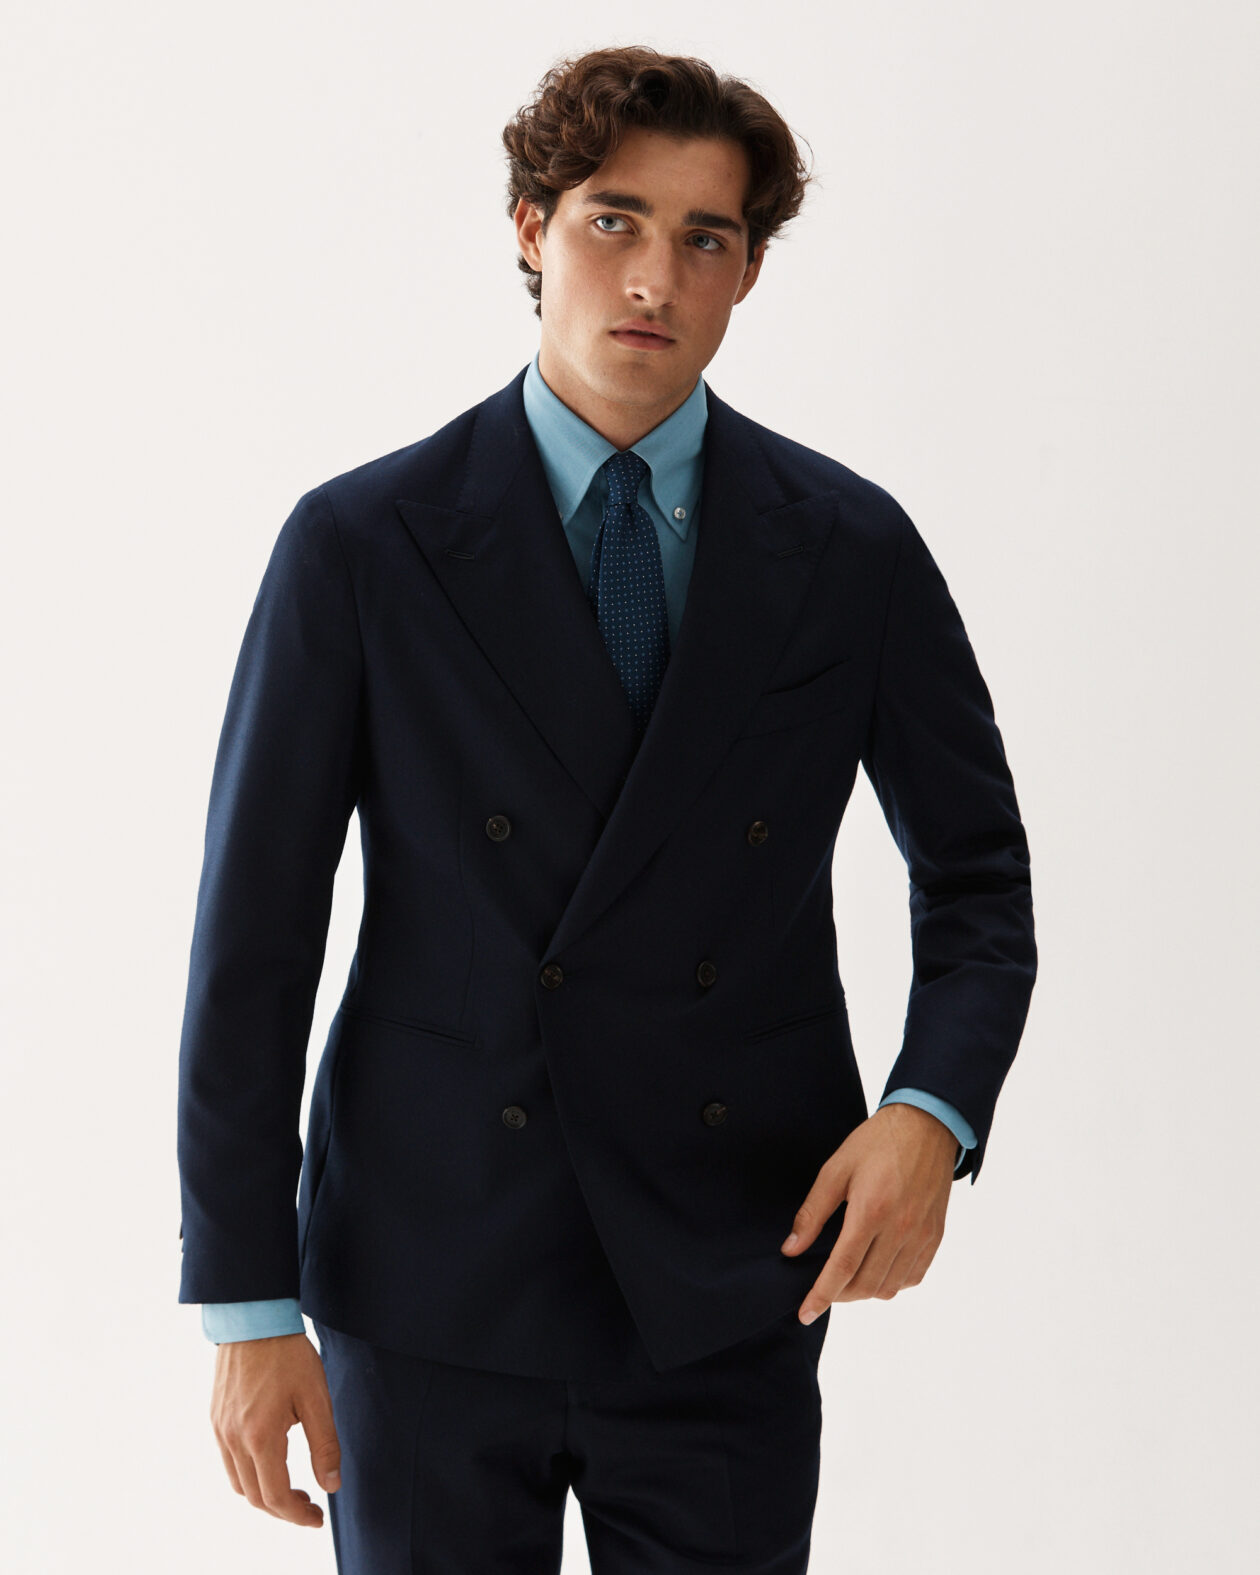 Flannel Double Breasted Suit Navy